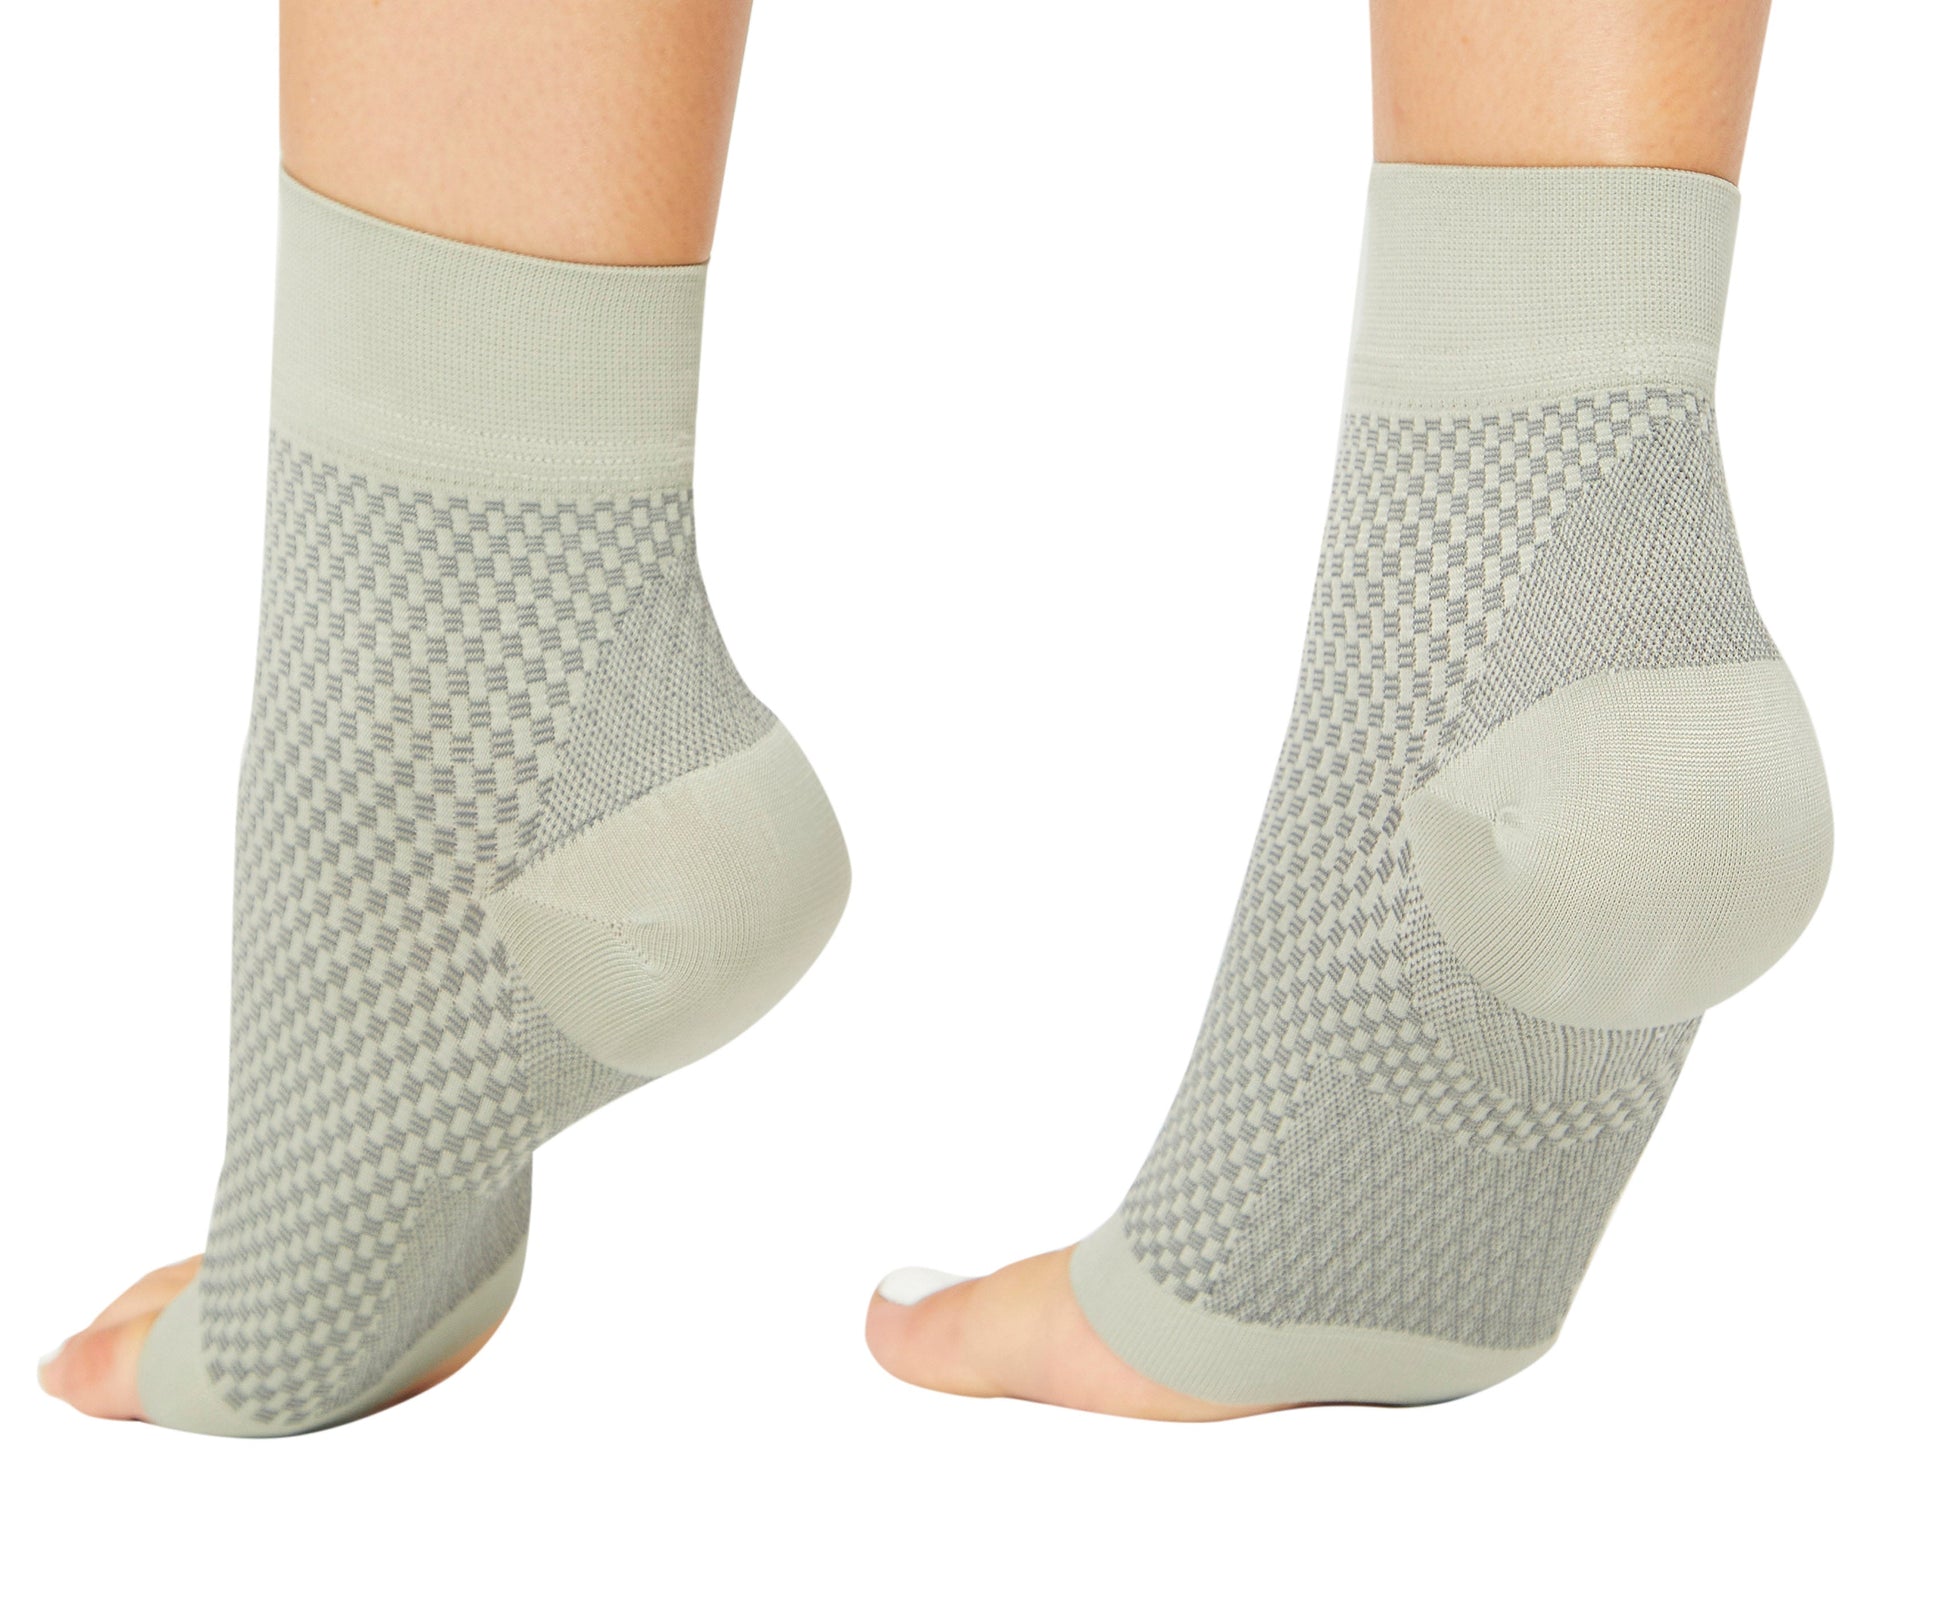 Theodore Magnus Premium Compression Socks for Plantar Fasciitis, Heel - Ankle Foot Sleeves for Everyday and Night Splints Pain Relief Treatment with Arch Support - Grey